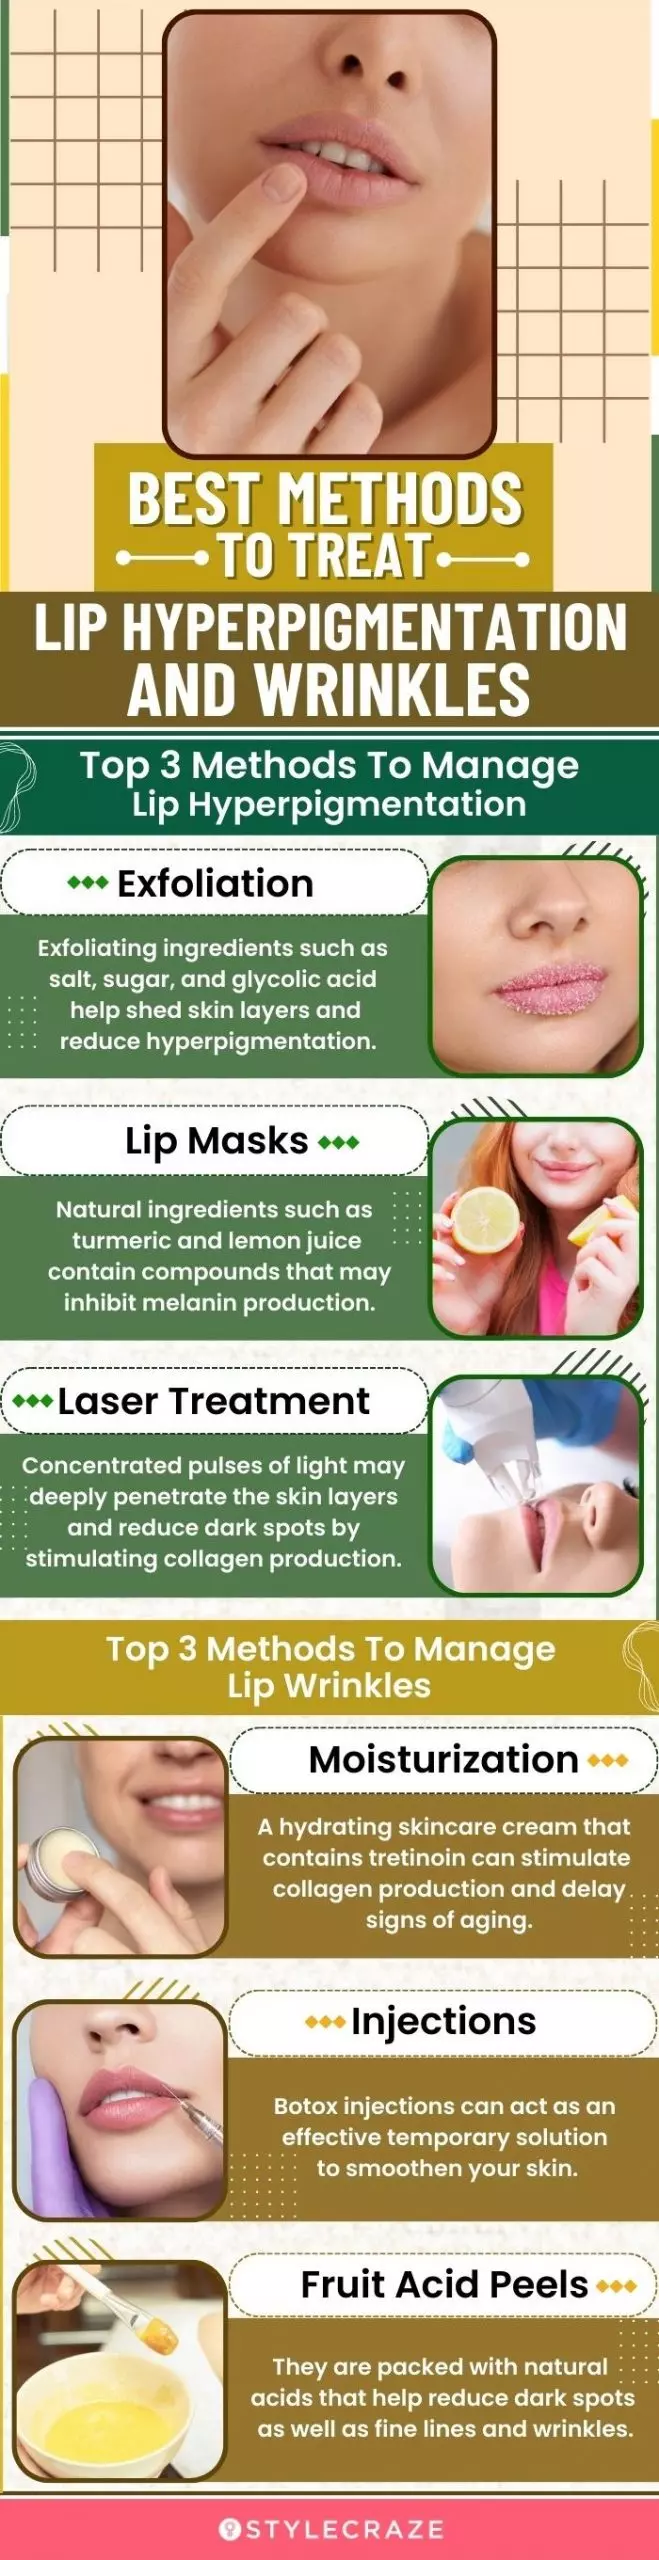 best methods to treat lip hyperpigmentation and wrinkles (infographic)